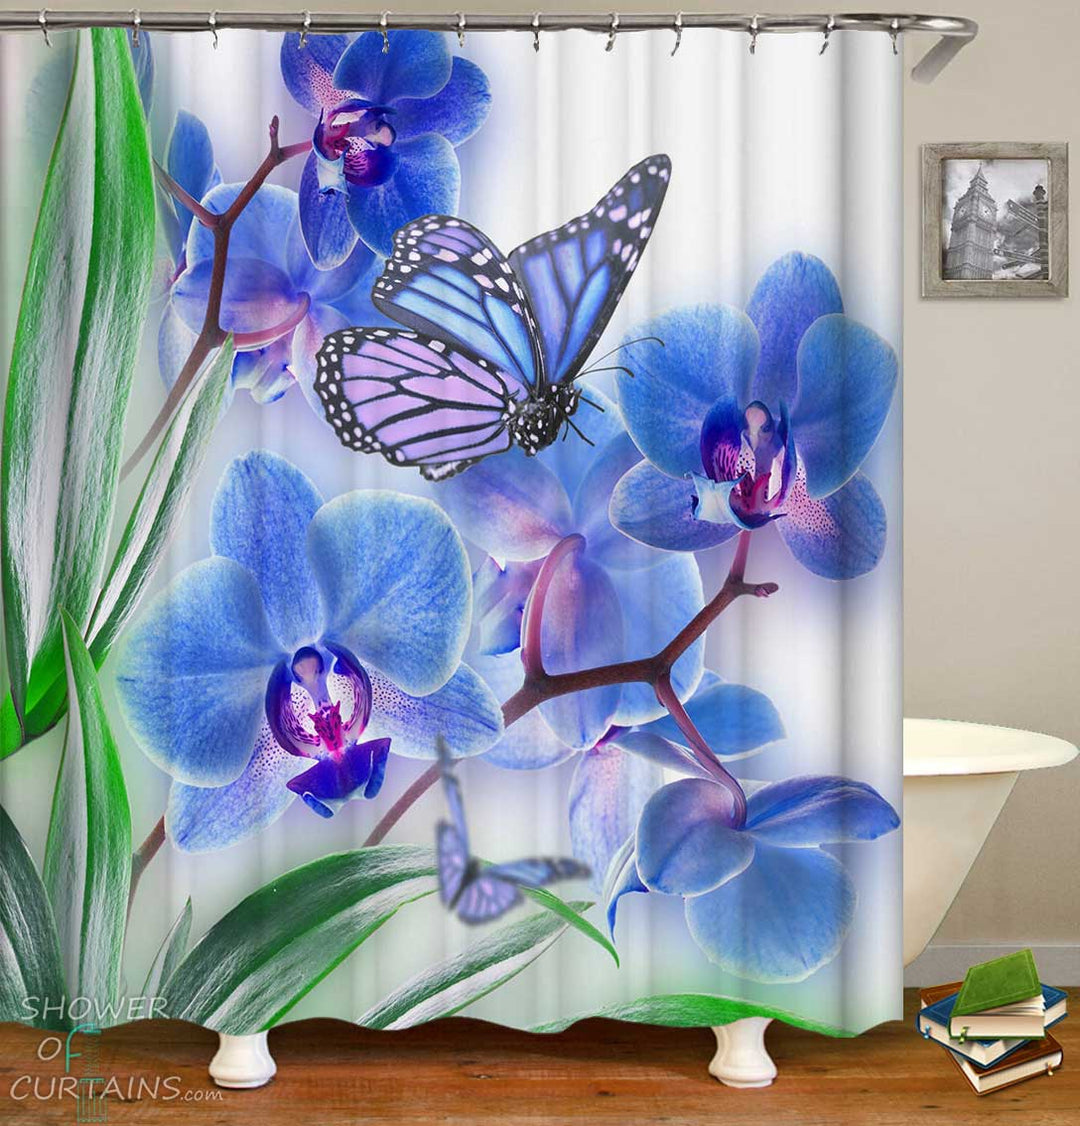 Shower Curtains with Bluish Floral and Butterfly